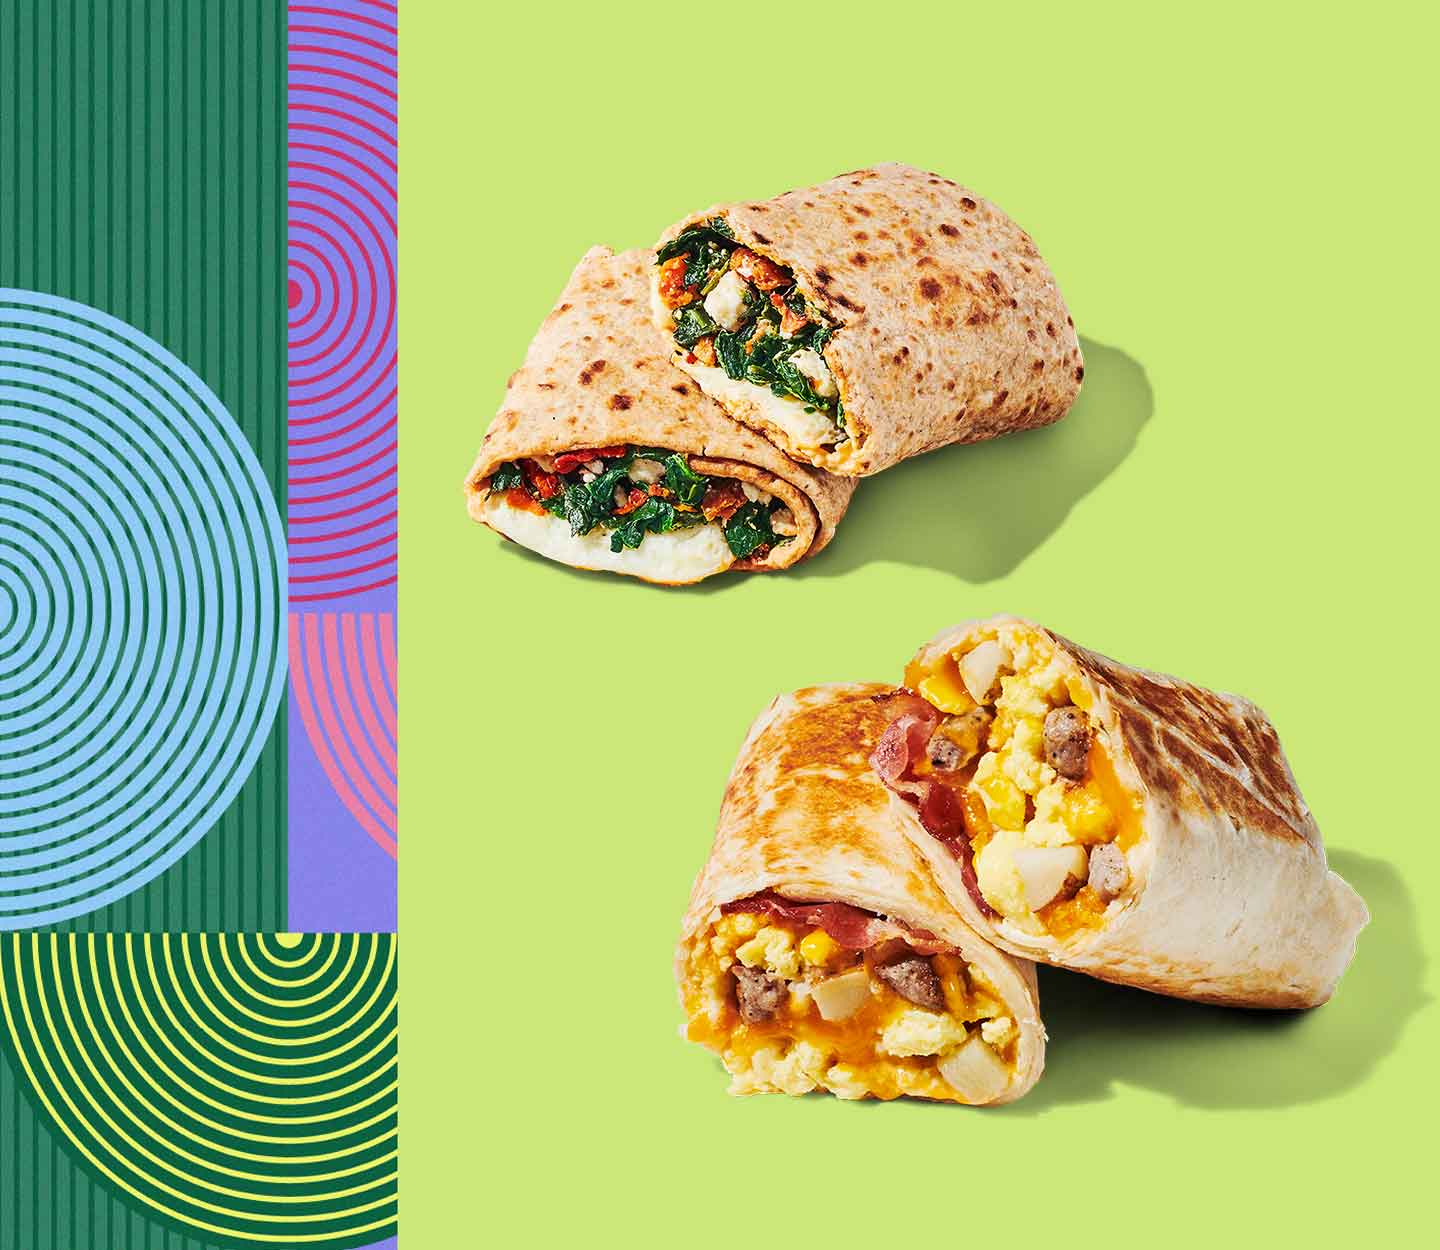 Two wraps sliced in half and stacked on top of themselves, revealing a combination of savory ingredients inside.